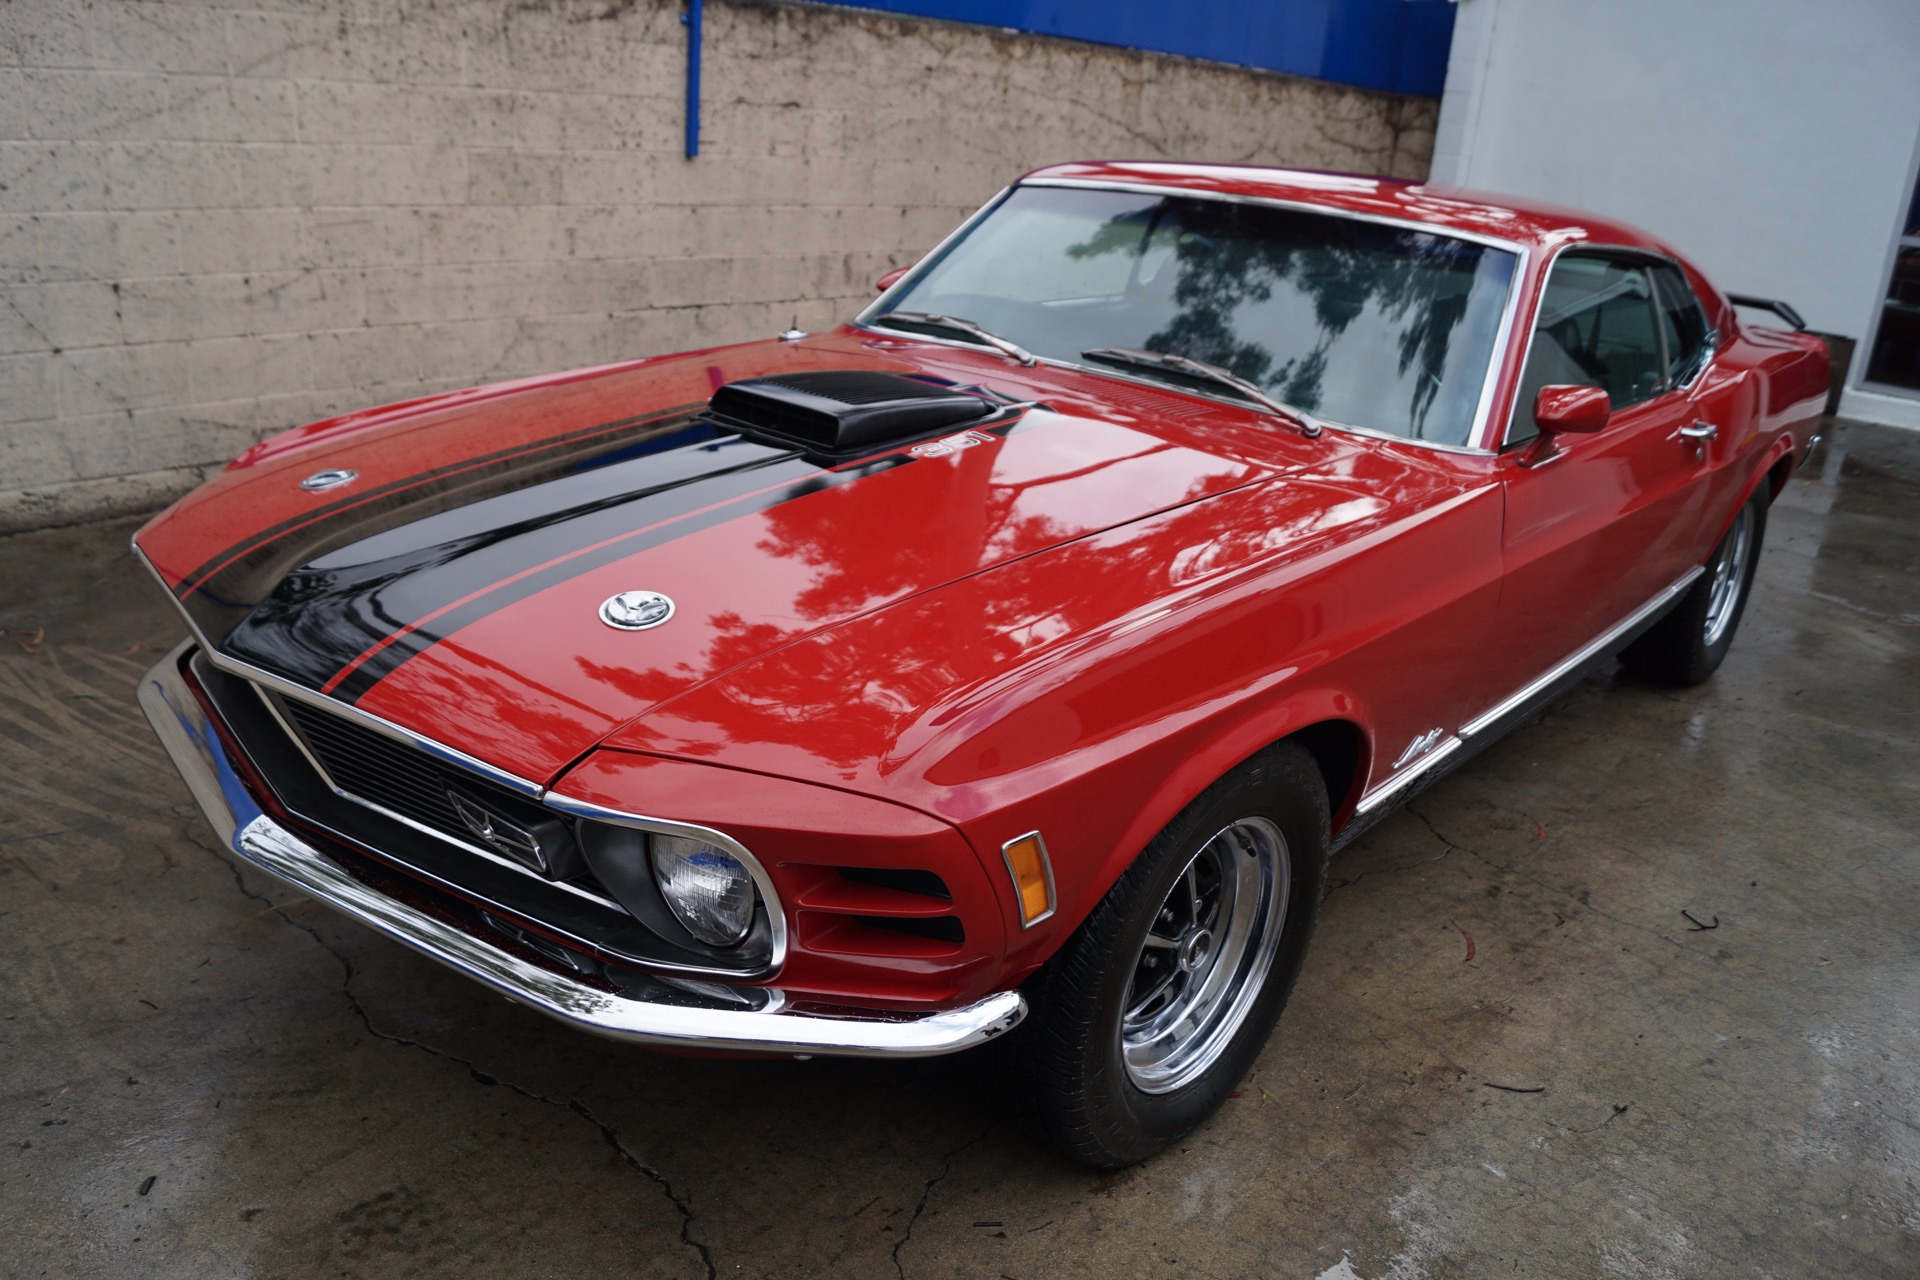 1970 Ford Mustang Mach 1 Mach 1 Stock # 108 for sale near Torrance, CA